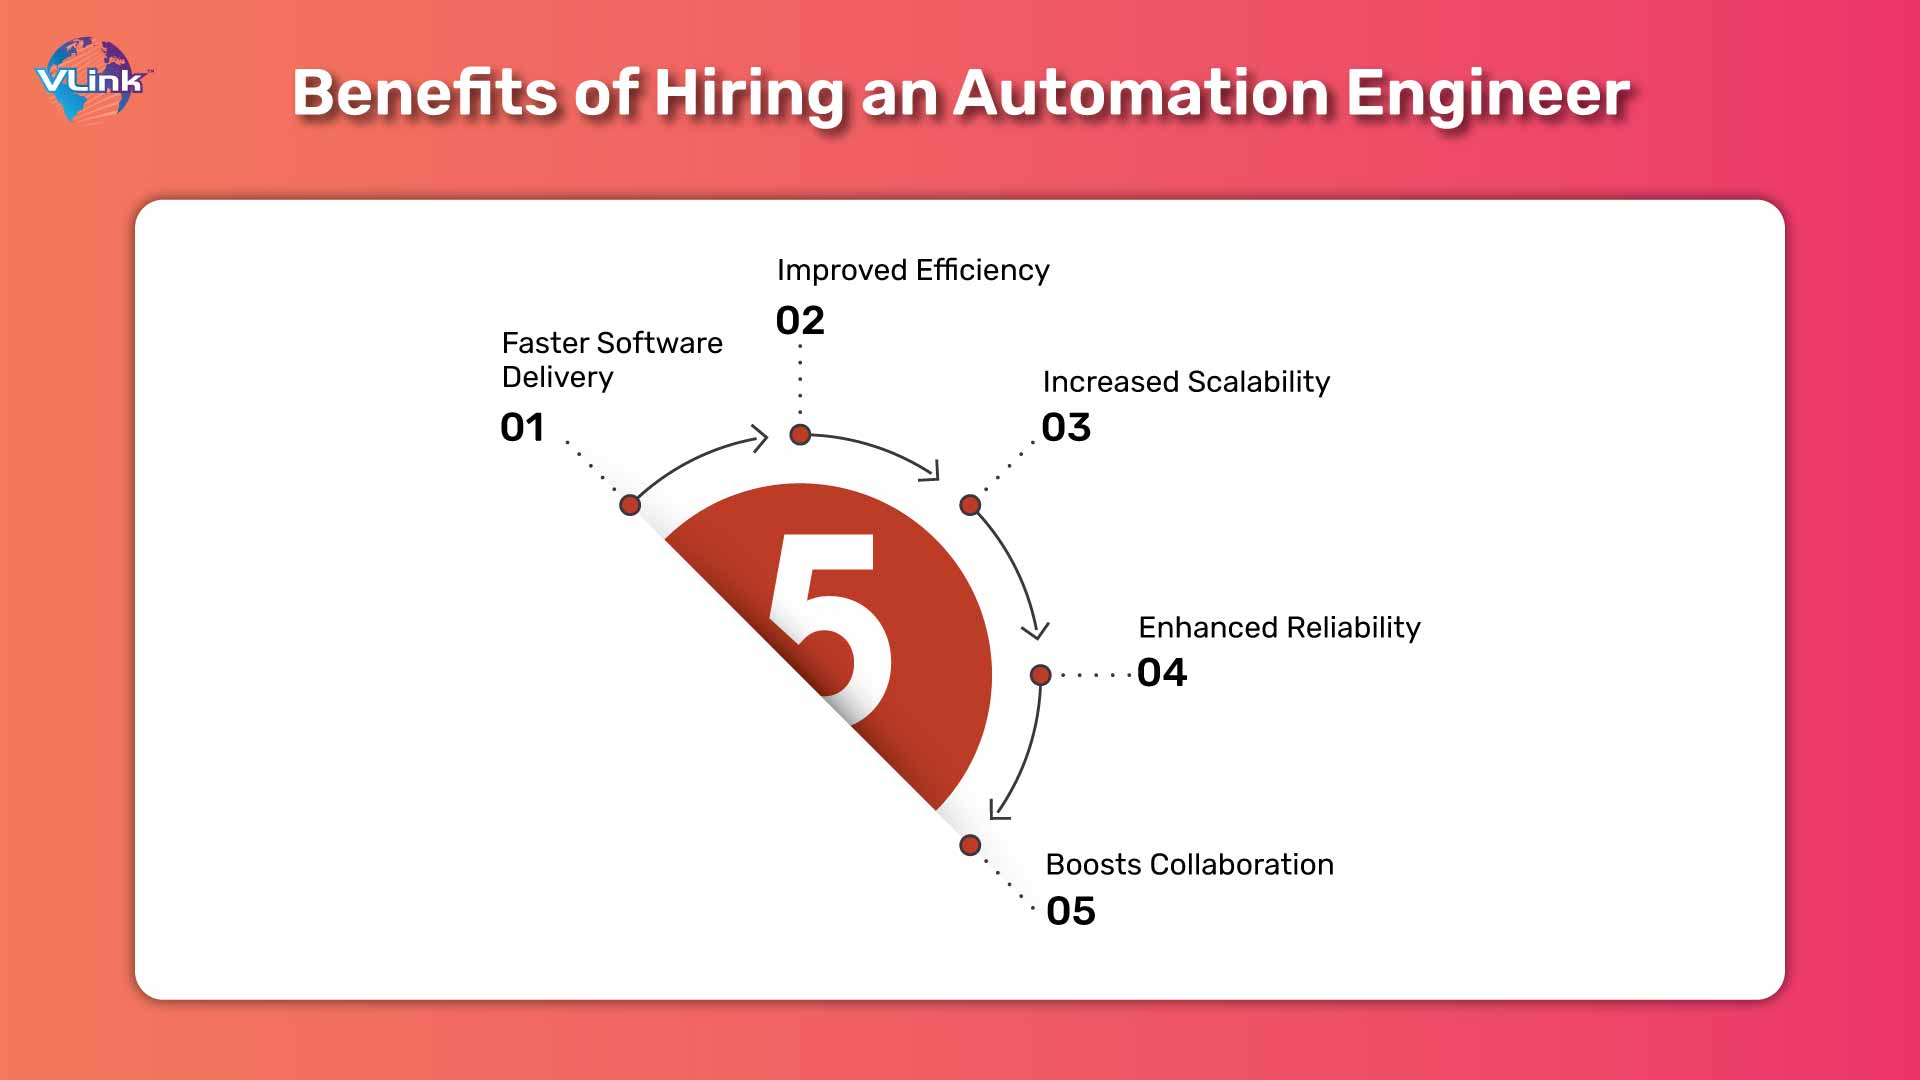 What Are the Benefits of Hiring an Automation Engineer